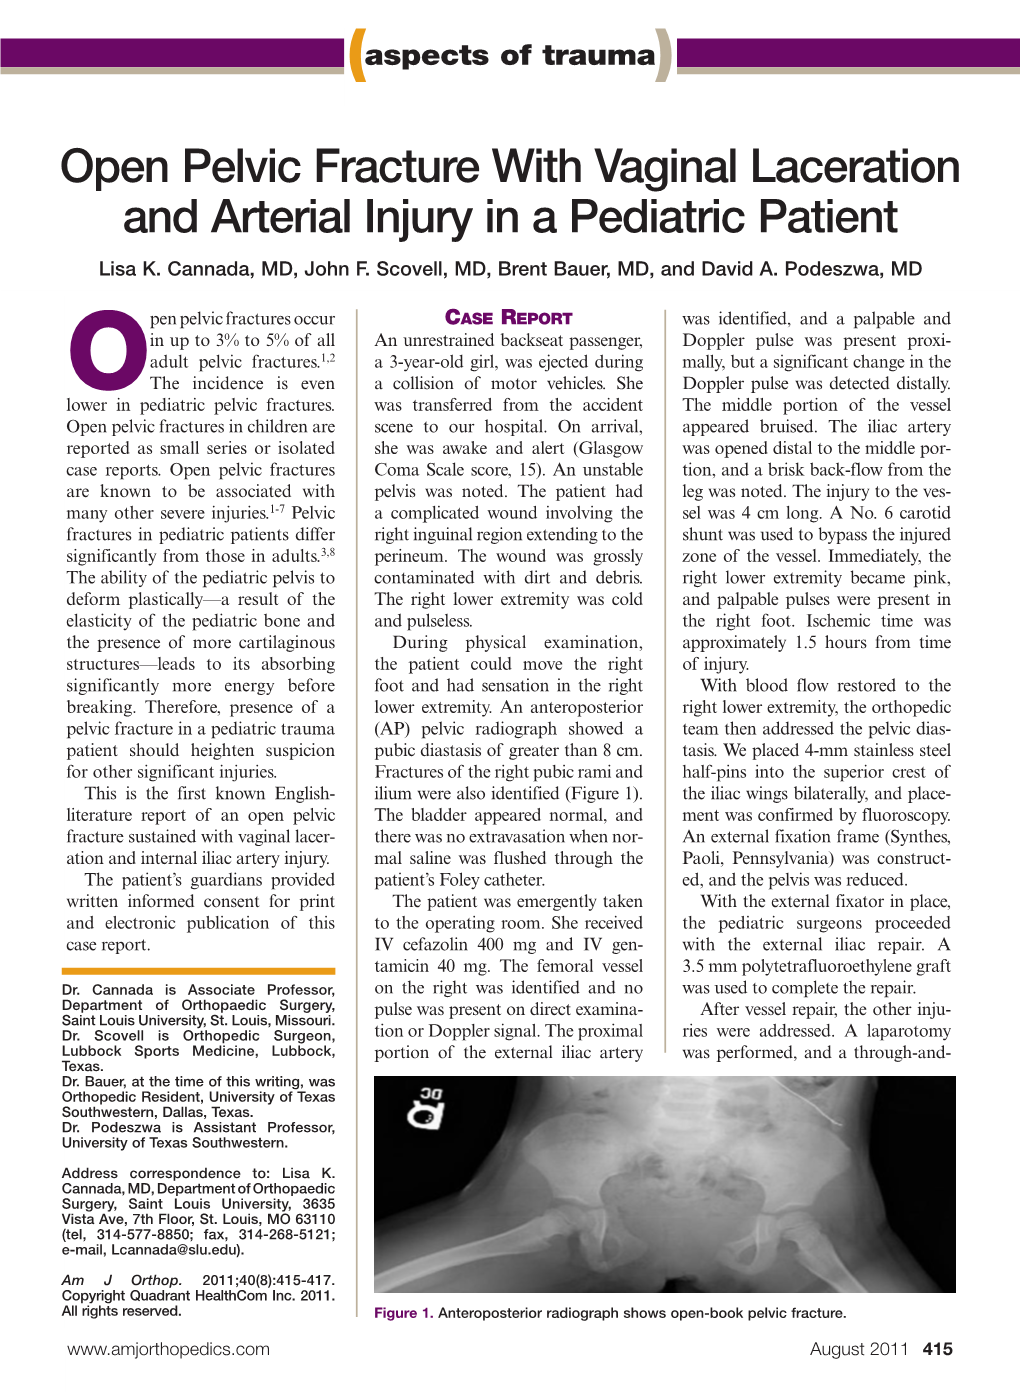 Open Pelvic Fracture with Vaginal Laceration and Arterial Injury in a Pediatric Patient Lisa K